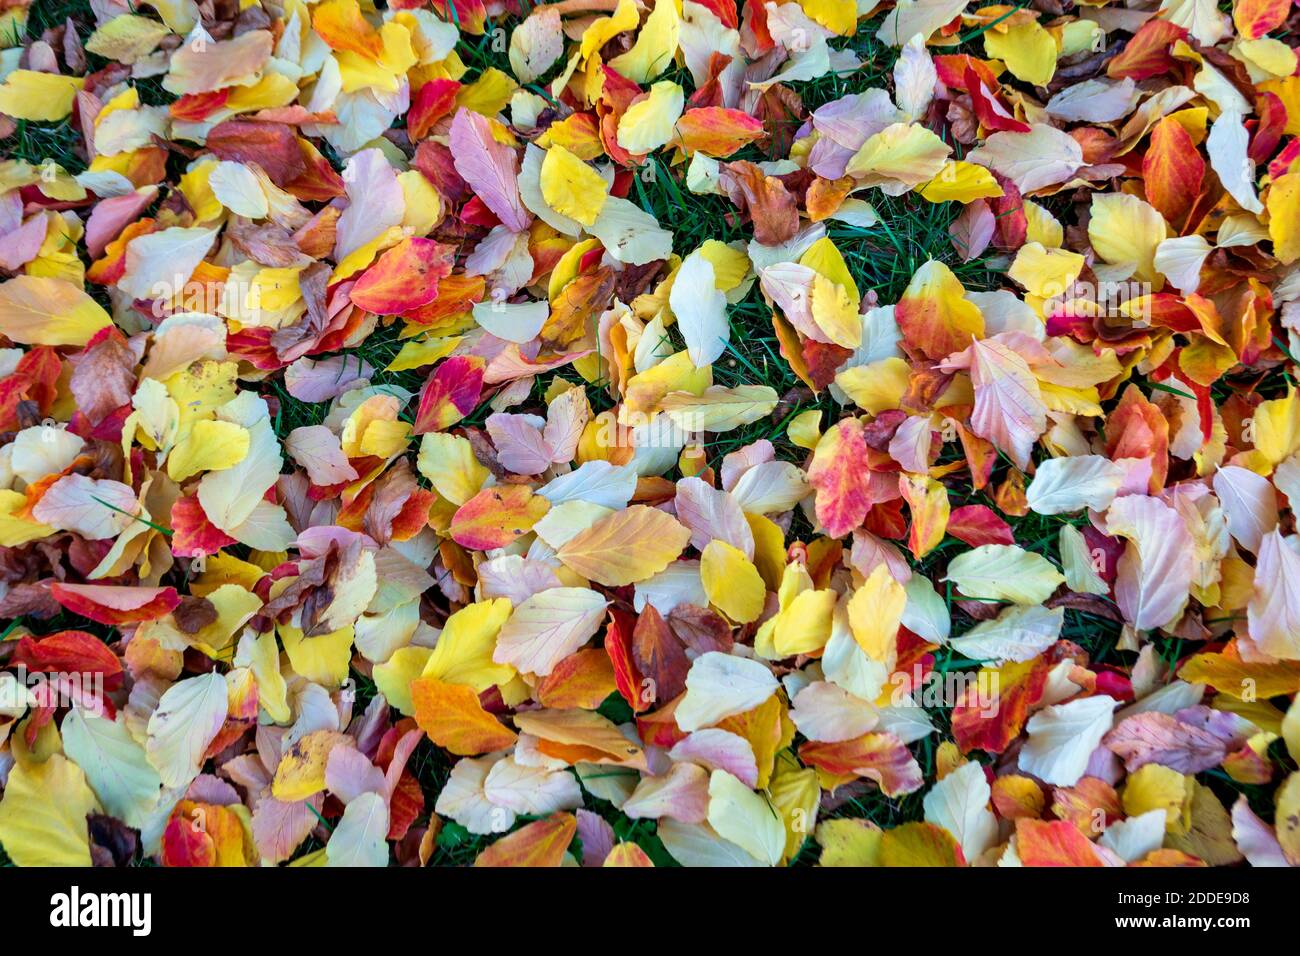 Autumn colored leaves on ground Stock Photo